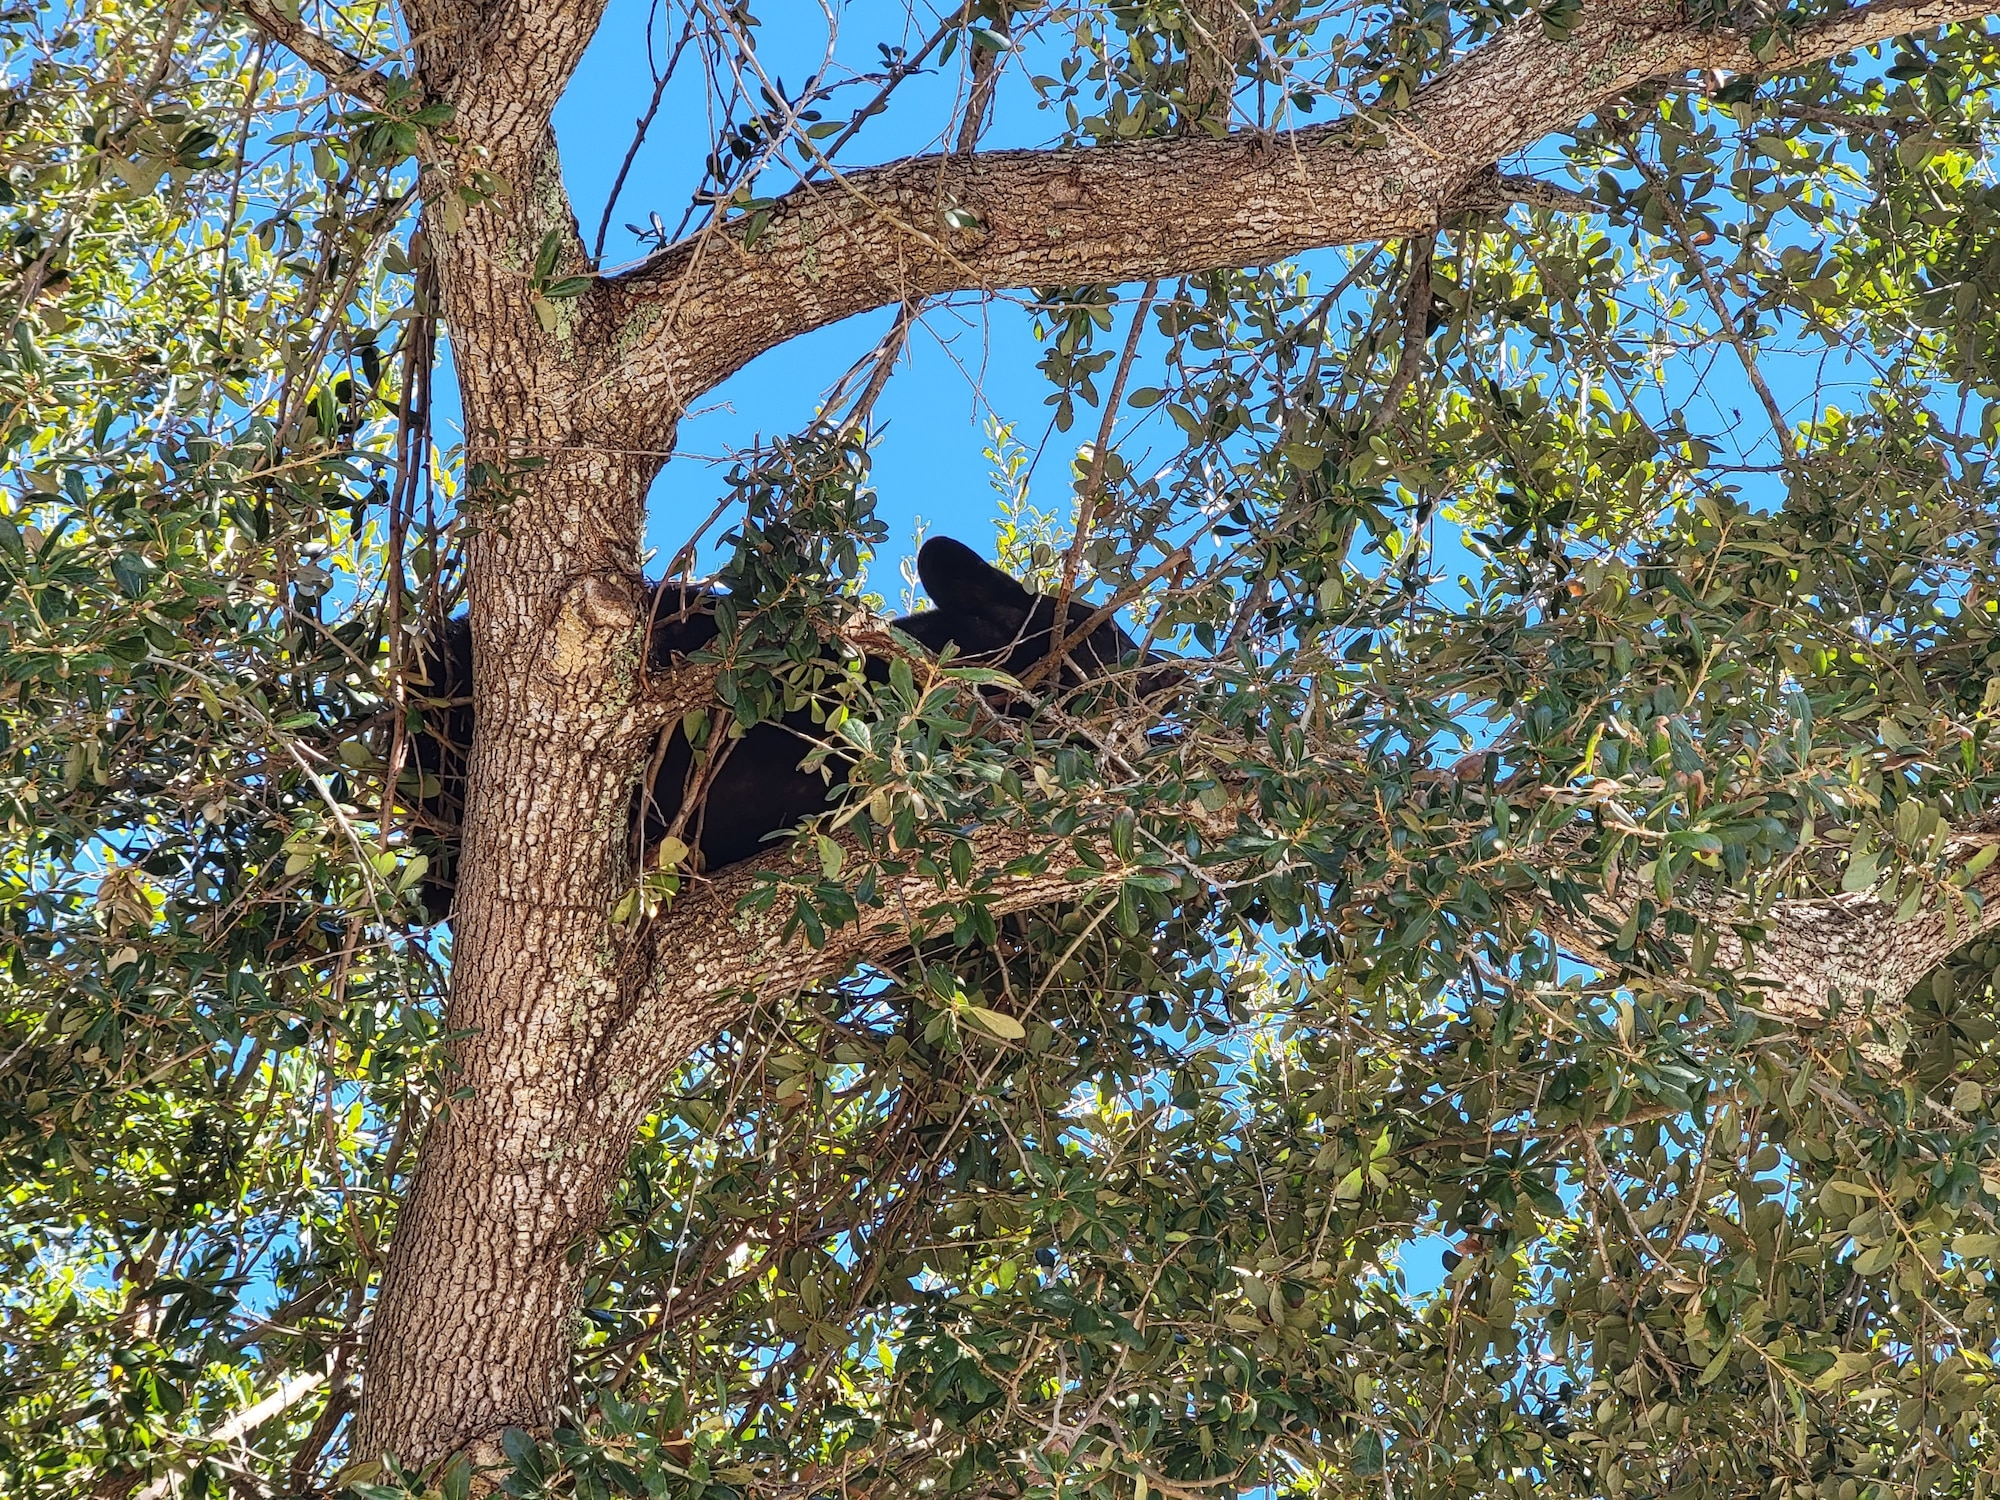 Florida black bears ress on the branch of a tree